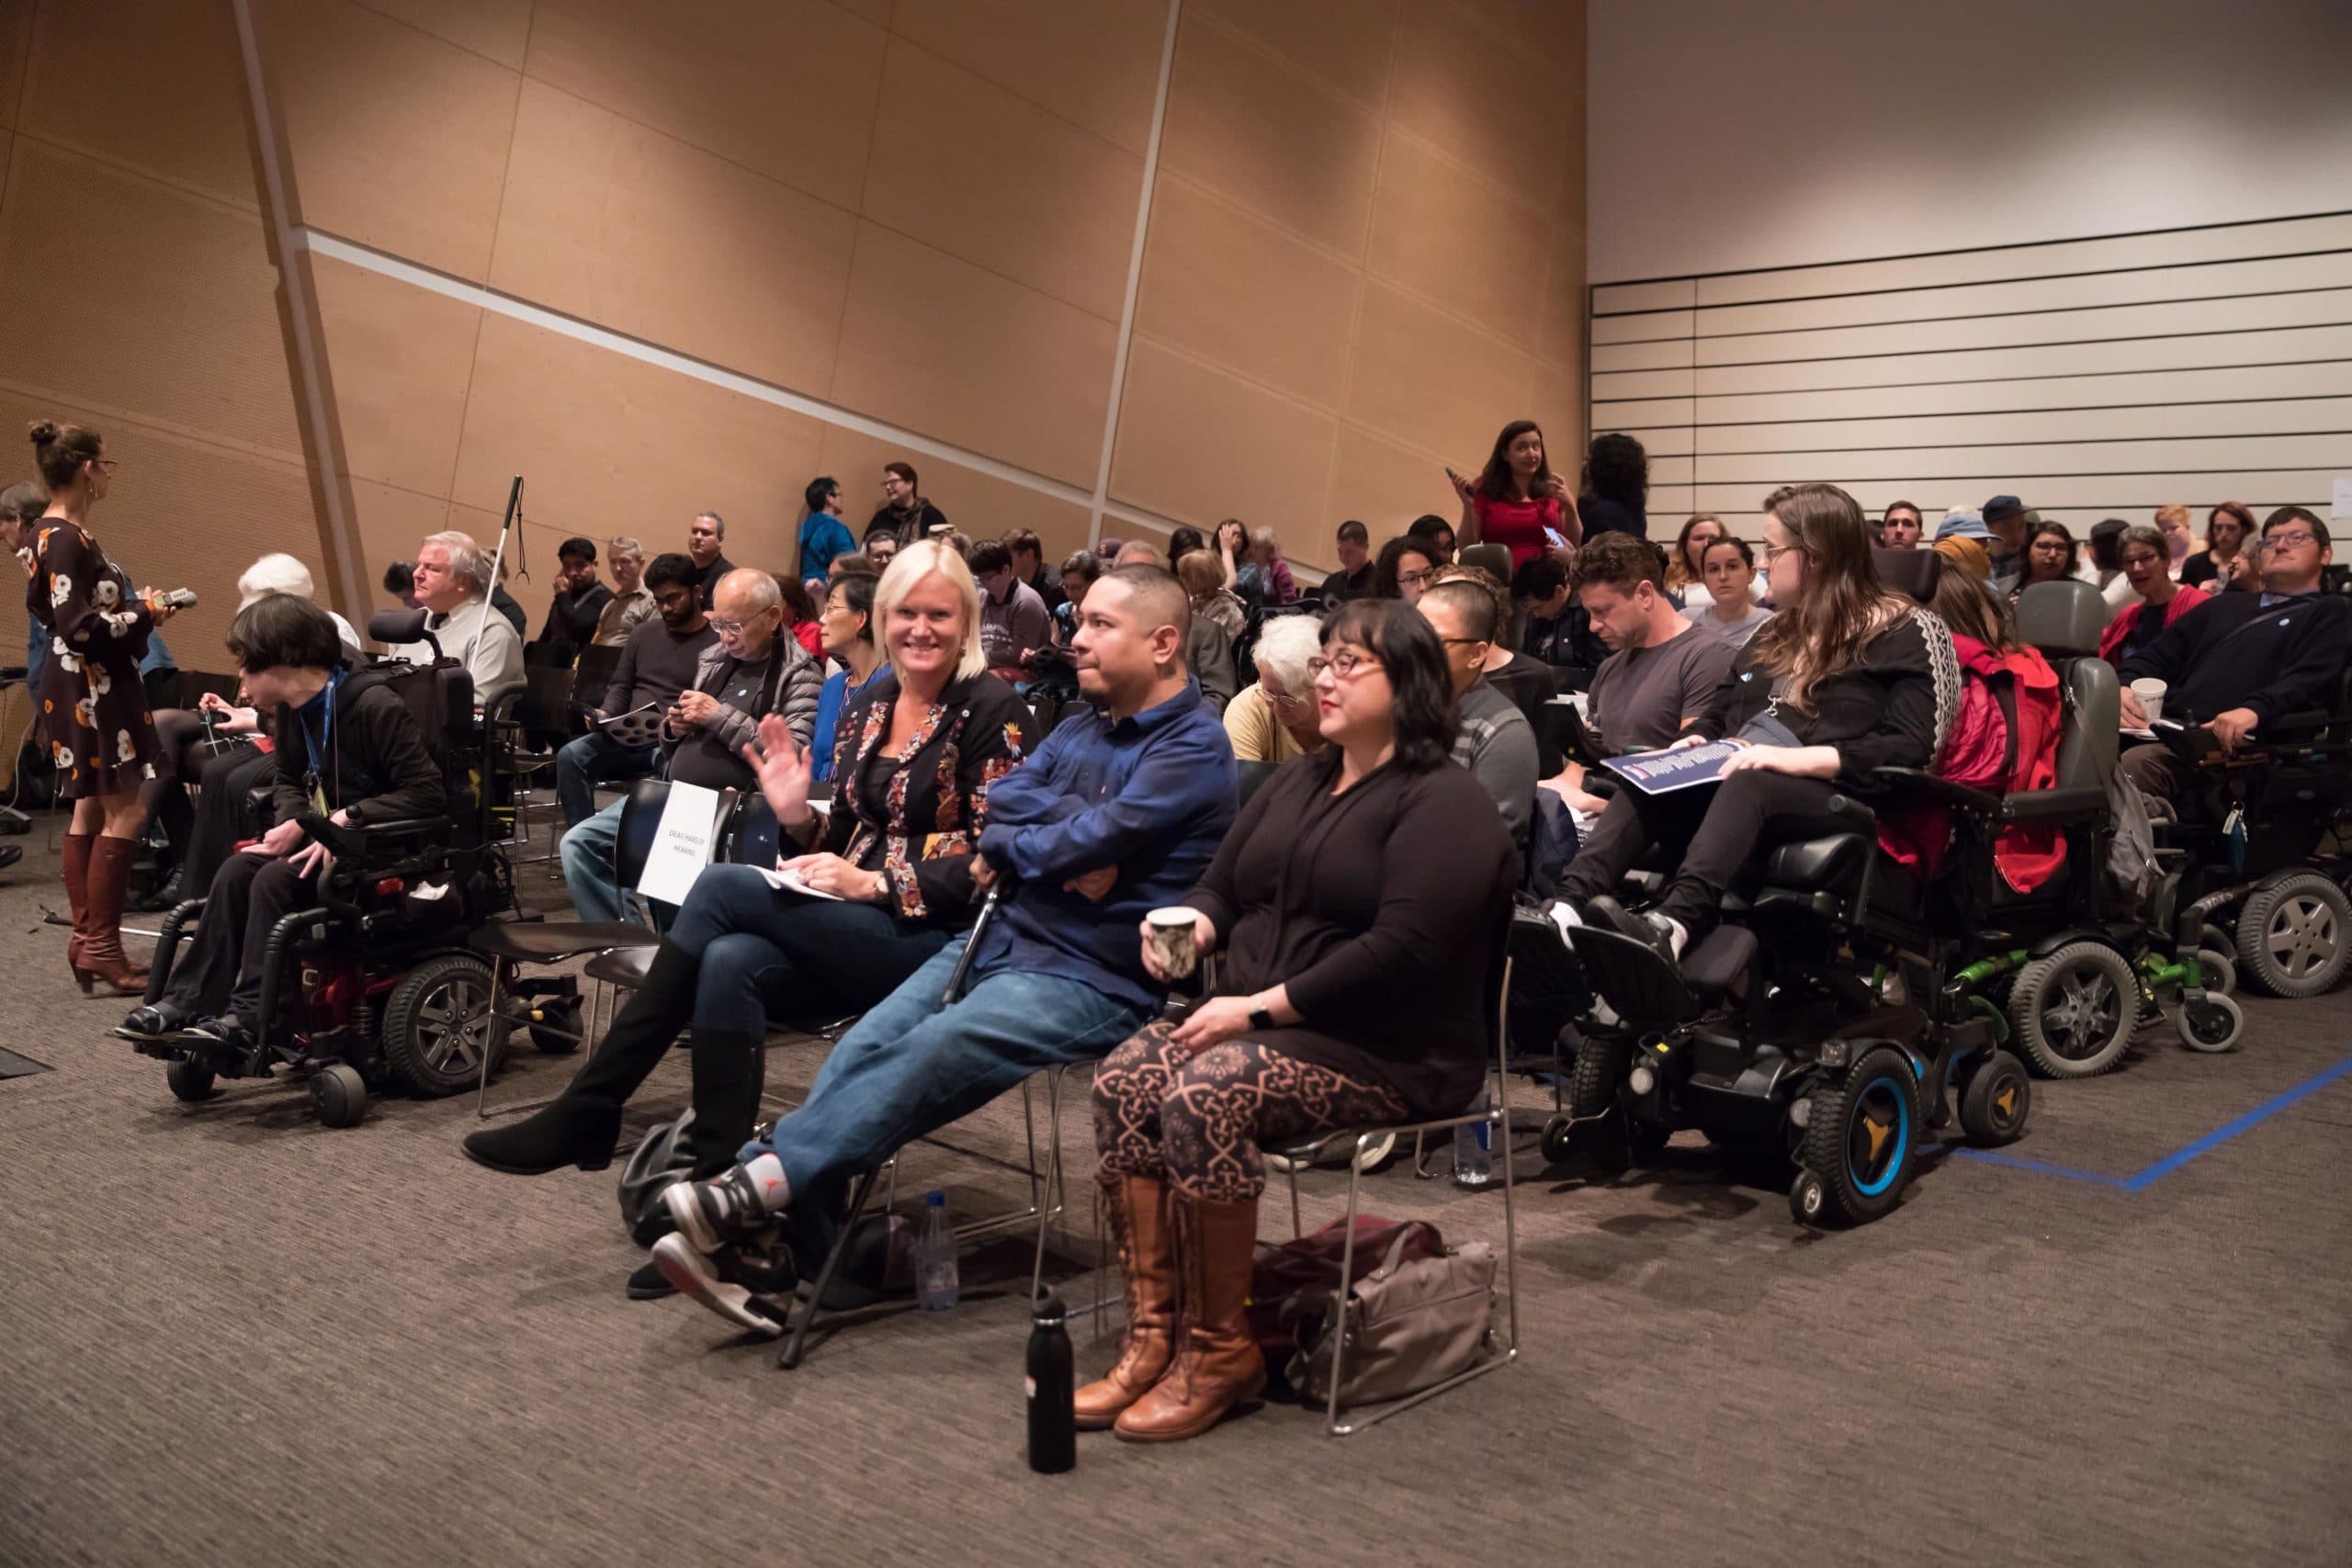 A group of people, some in wheelchairs, sitting in a room for a Superfest screening.